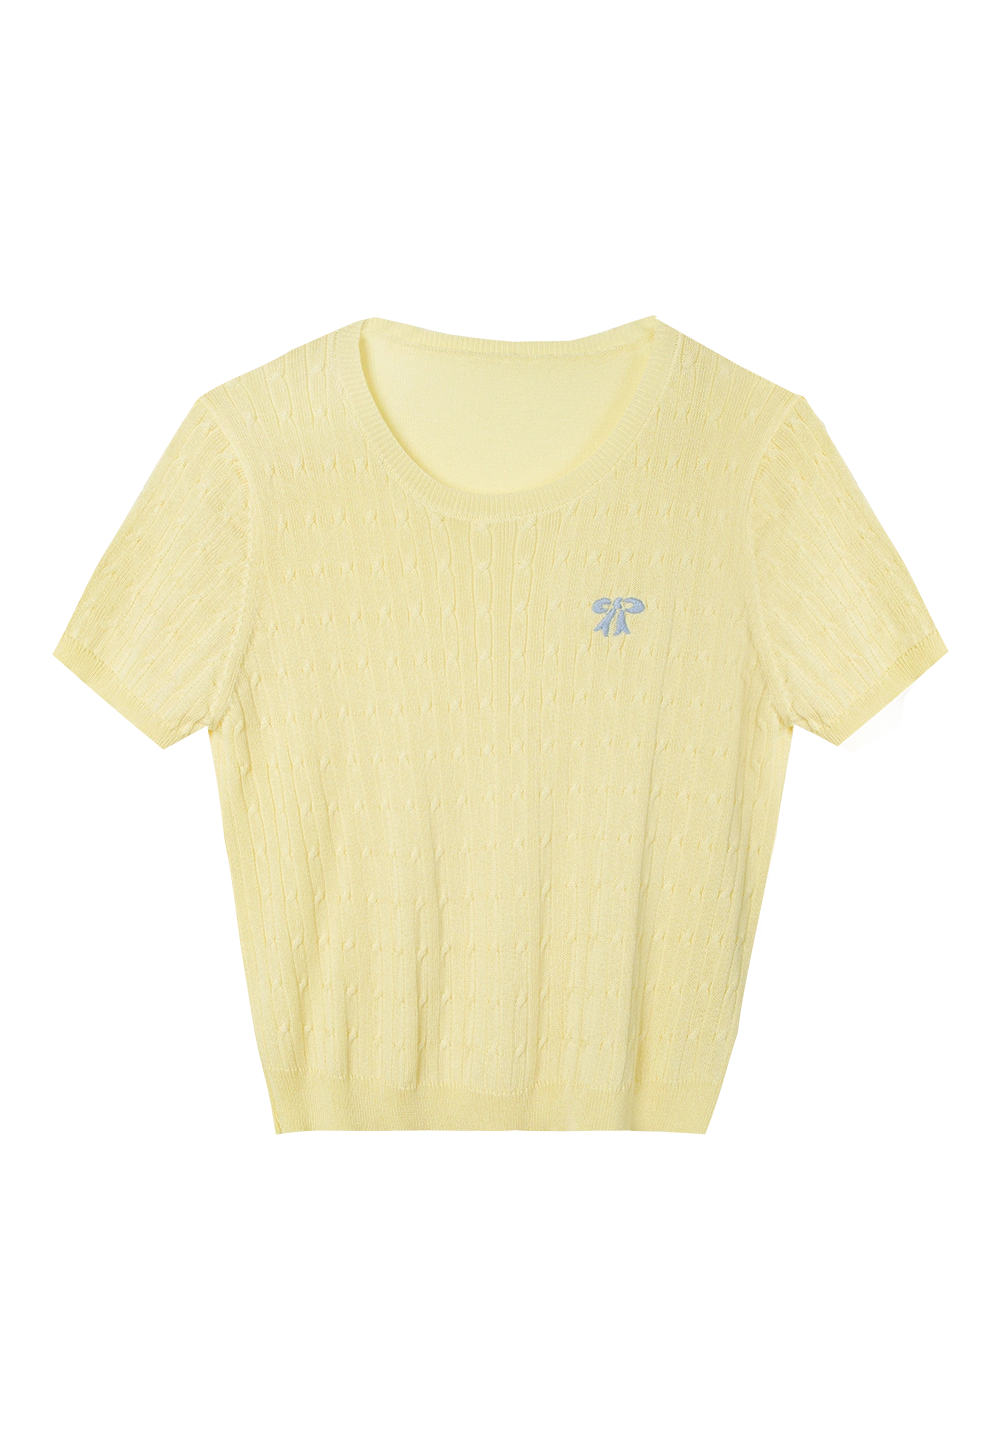 Women's Lightweight Short Sleeve Knit Top with Textured Pattern in Heather